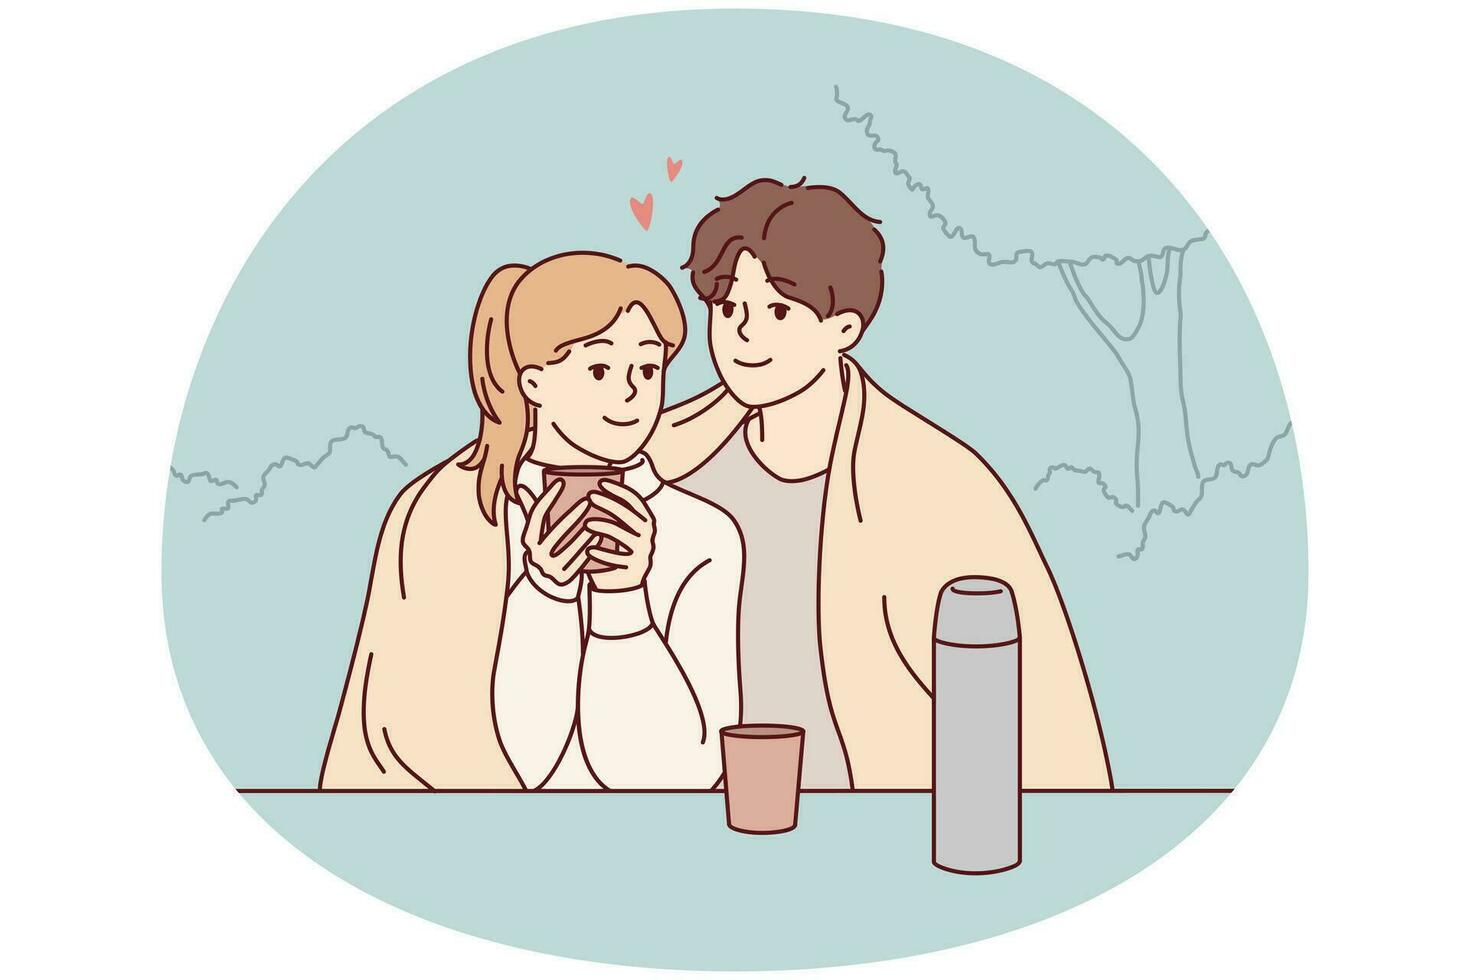 Happy couple sitting in park hugging drinking warm coffee enjoy romantic date together. Smiling loving man and woman embrace cuddling outdoors. Vector illustration.